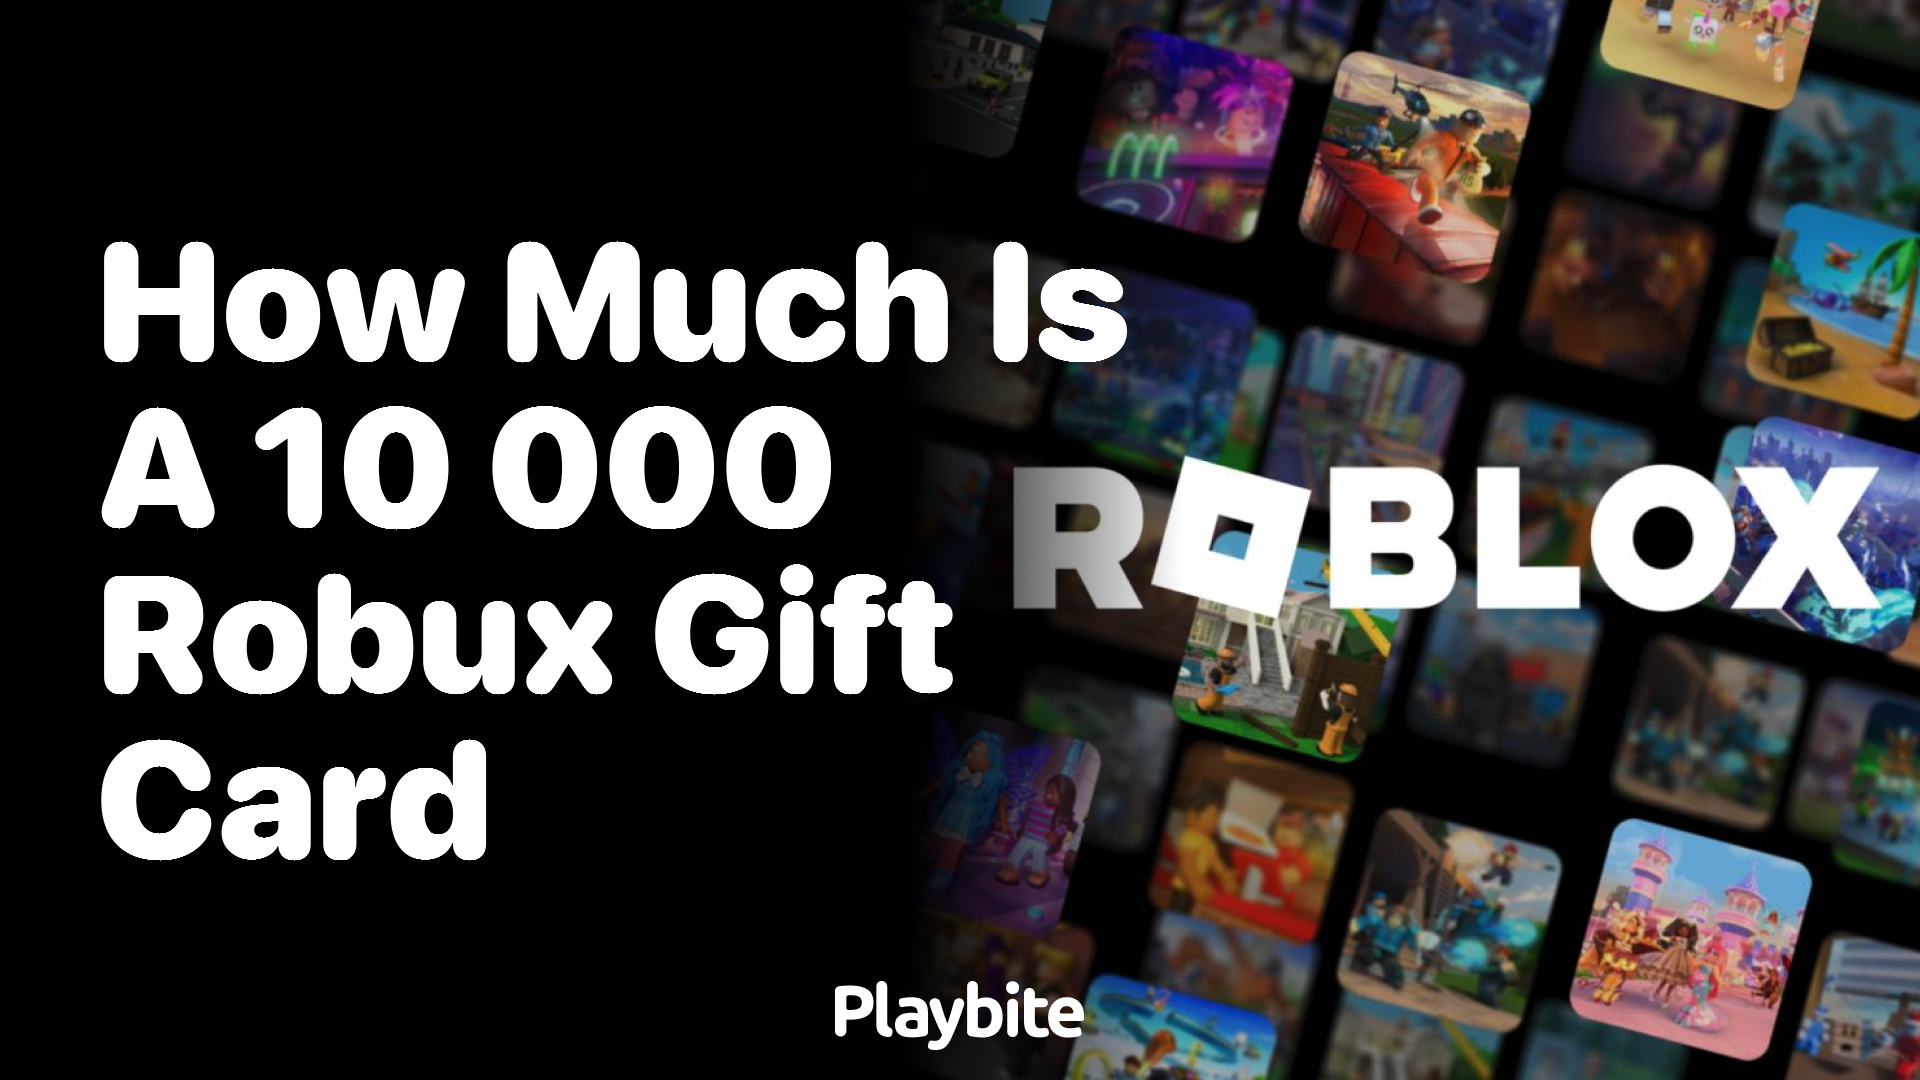 How Much Does a 10,000 Robux Gift Card Cost? - Playbite